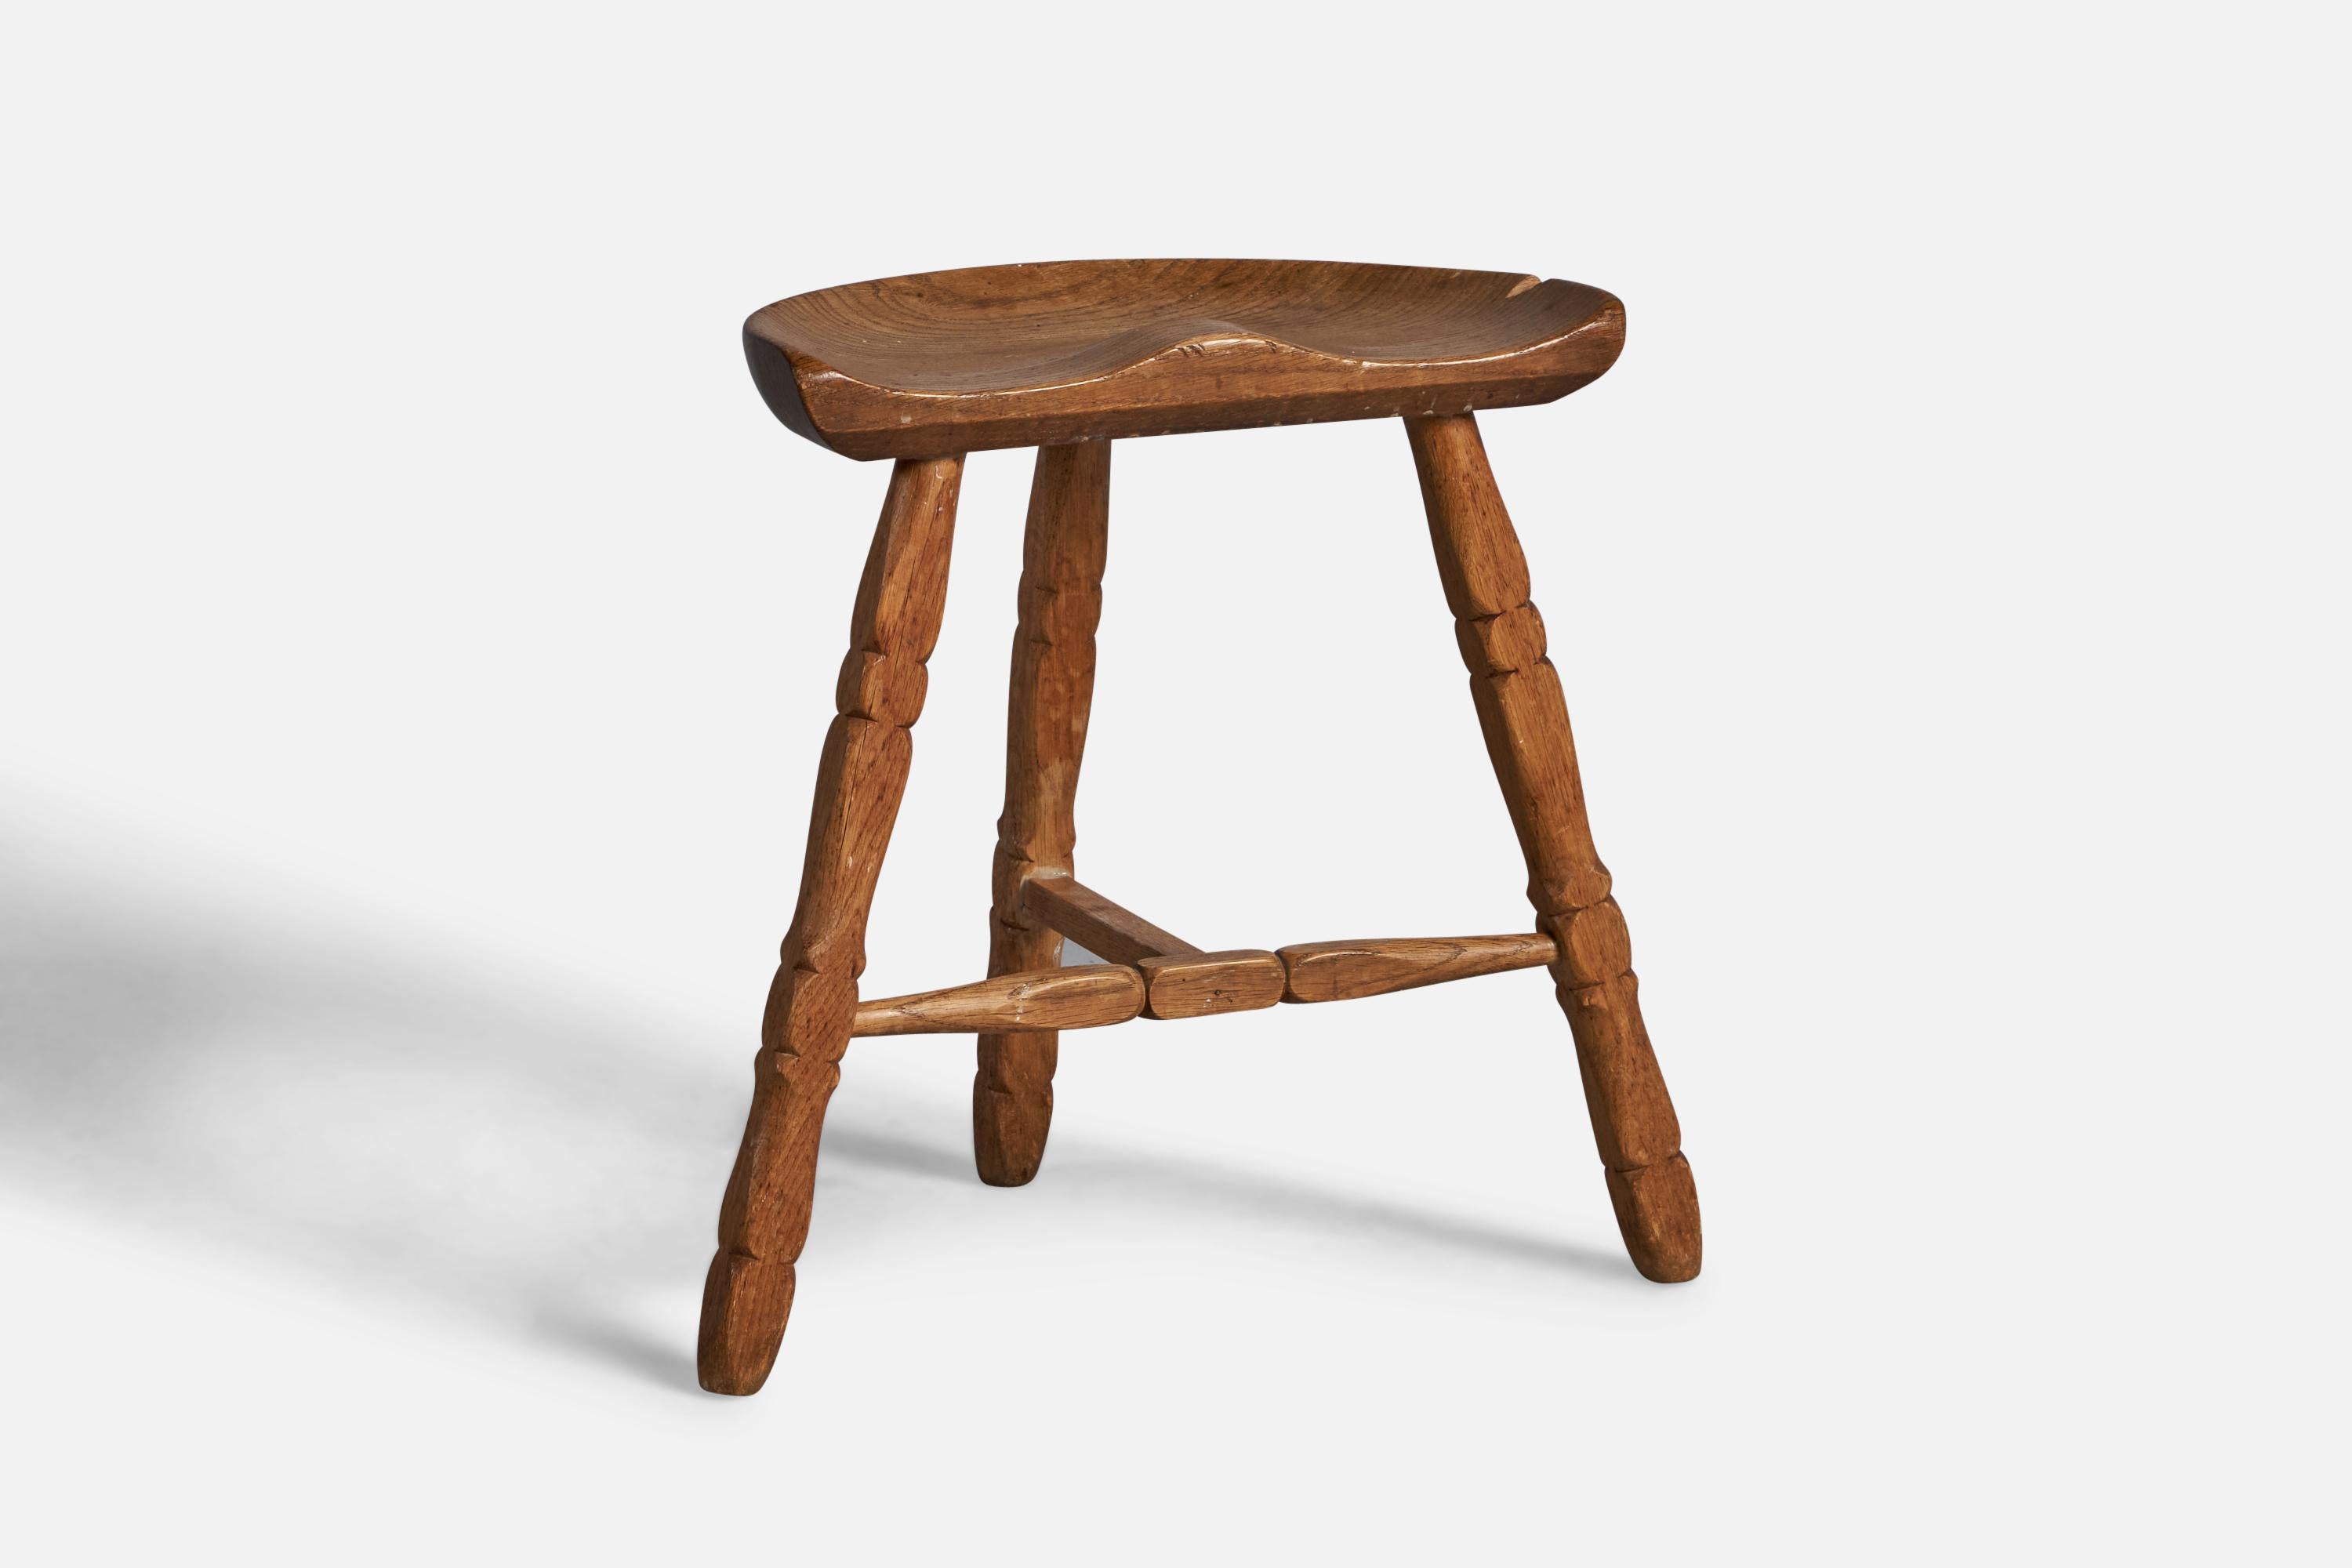 A solid oak stool, designed and produced in Denmark, 1950s.
